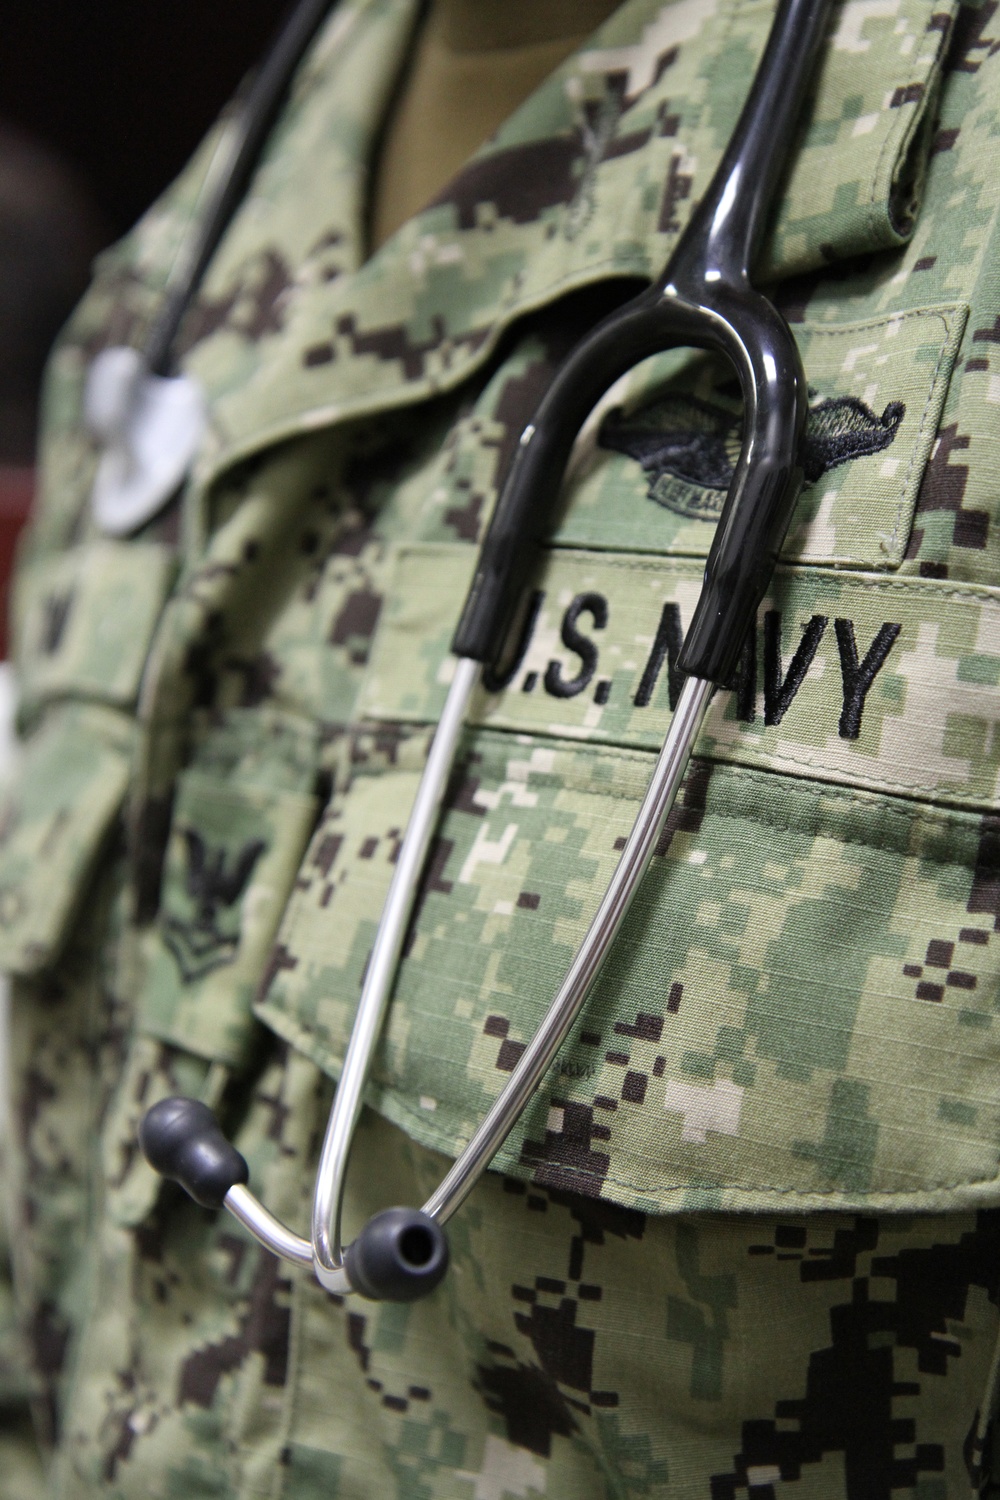 Corpsmen in the camps: 24-hour detainee medical care